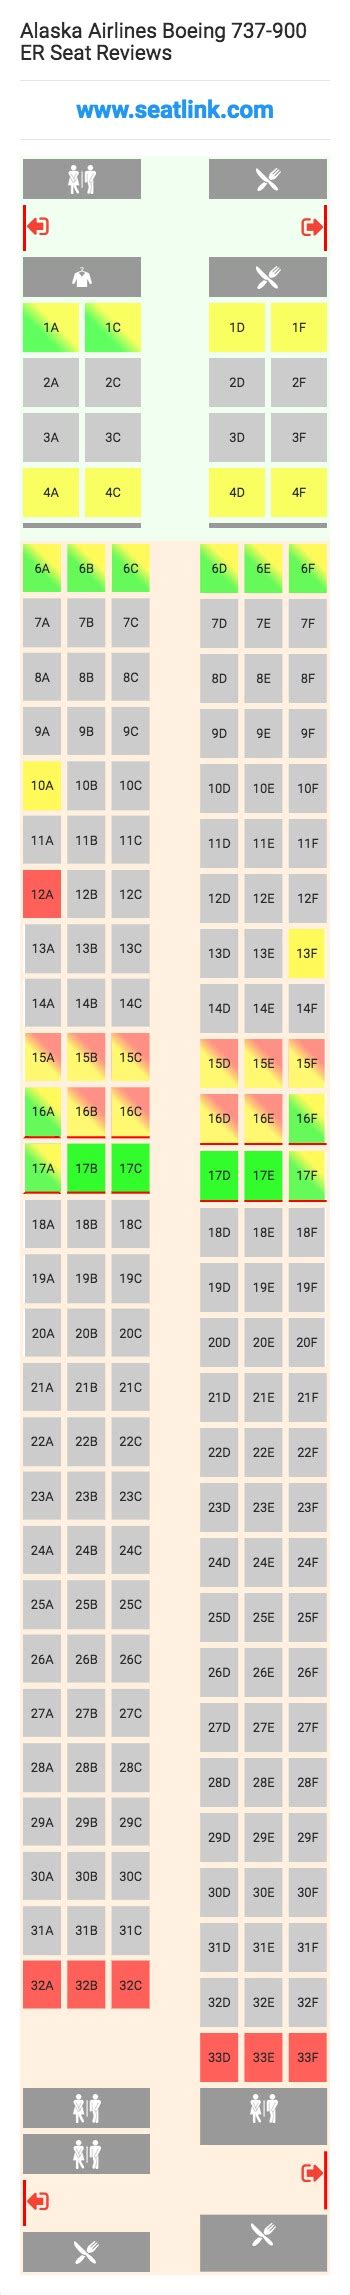 Alaska Airlines Boeing Seating Chart